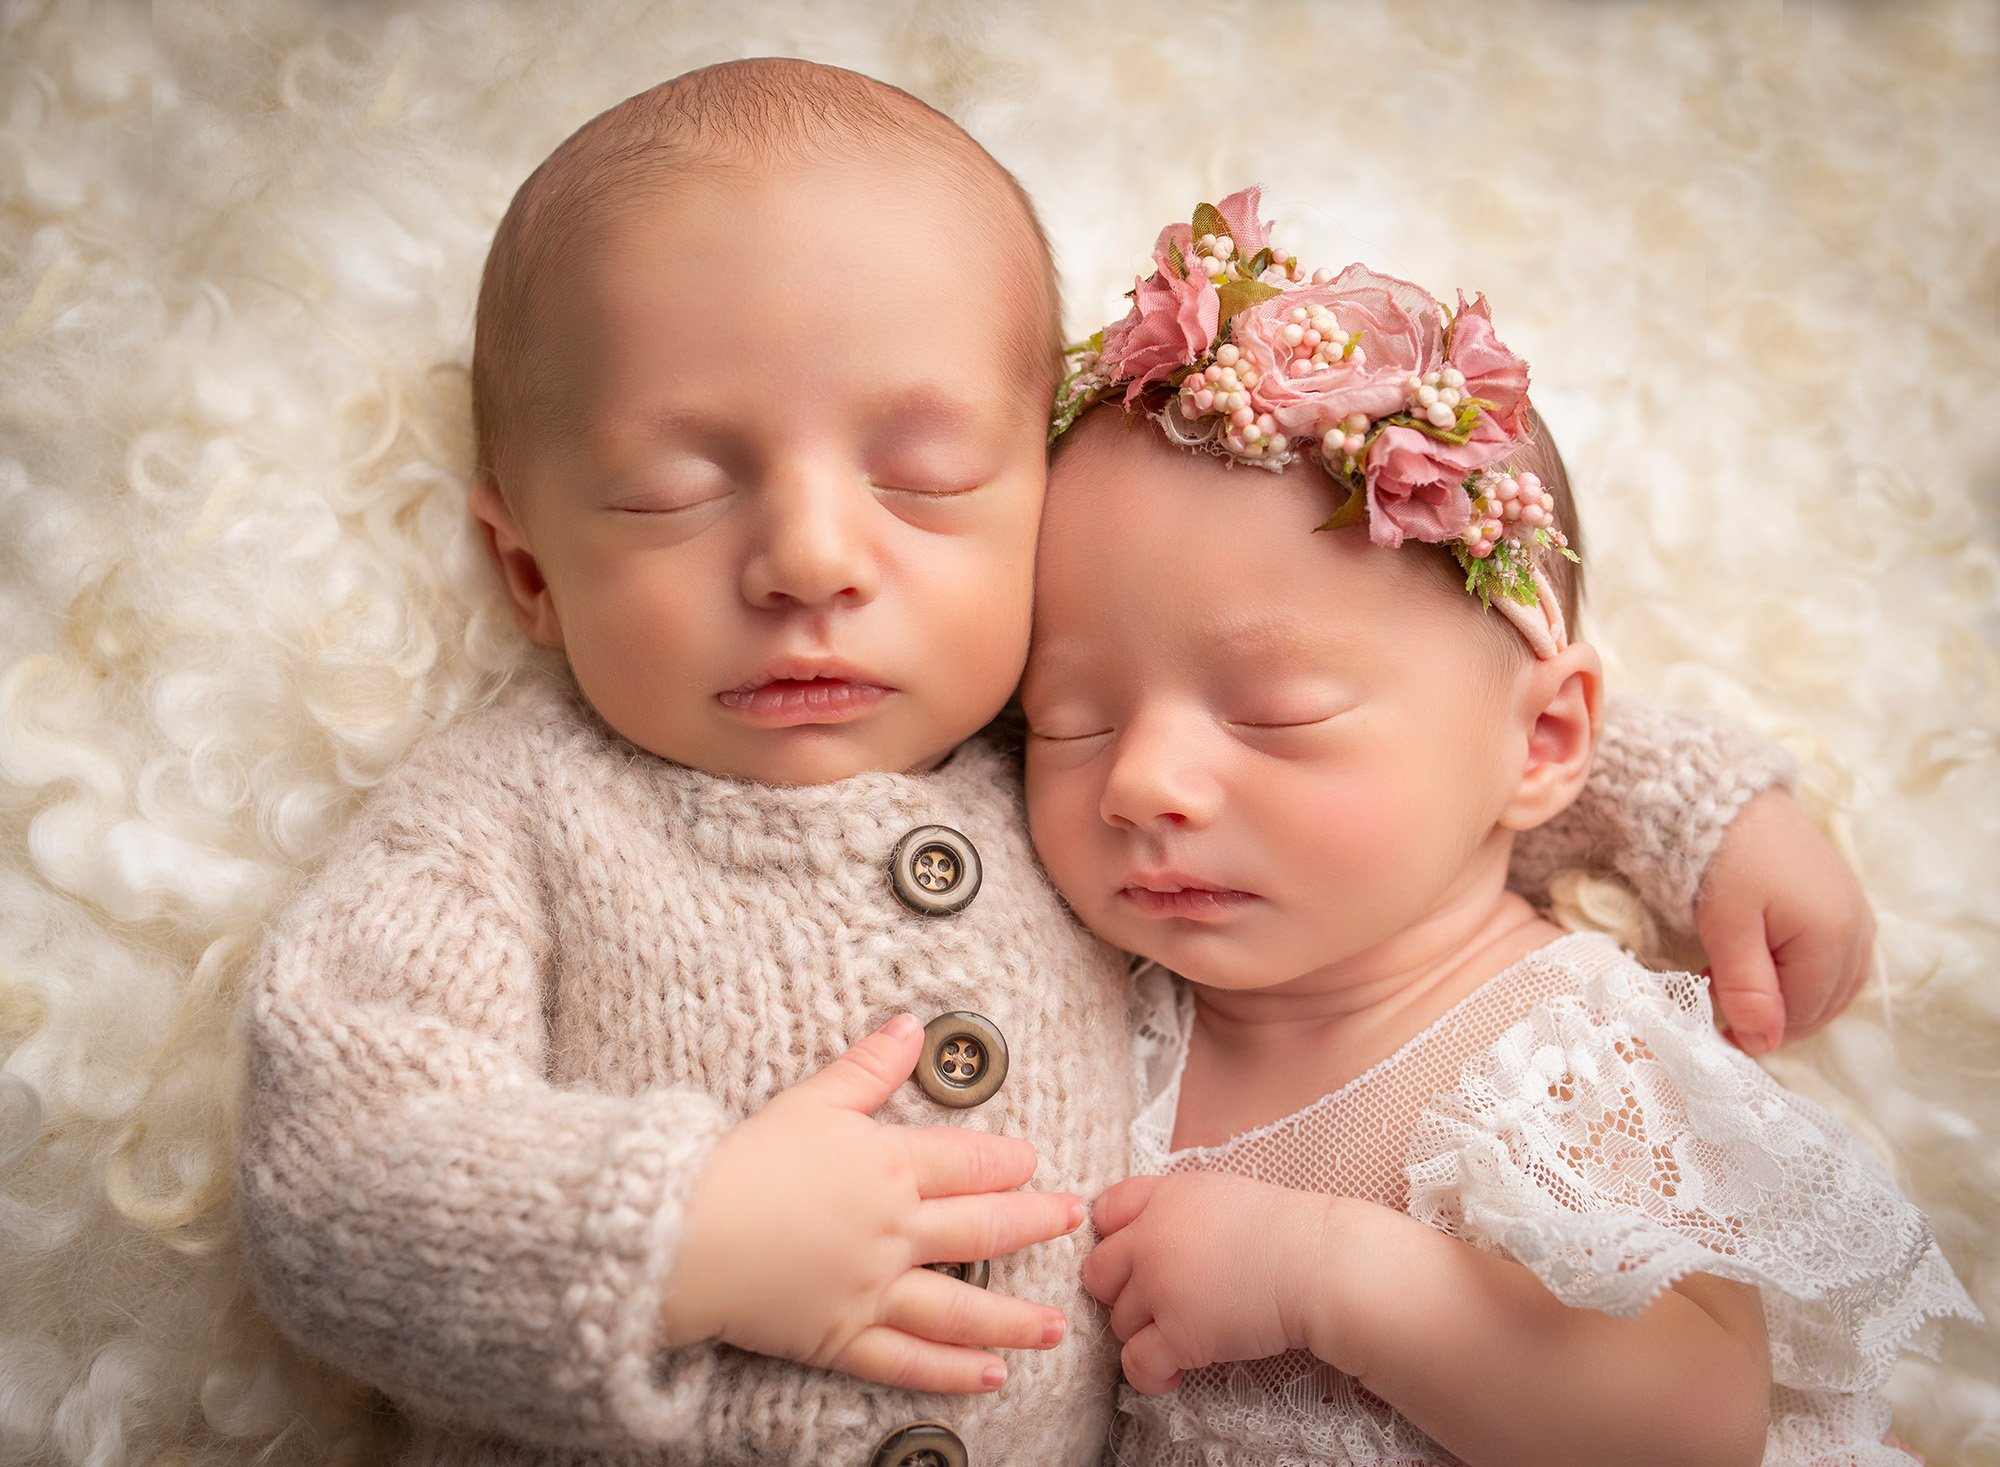 Twins newborn photography newborn baby boy asleep with his arm wrapped around his twin sister asleep in lace dress with pink floral headband on white fuzzy blanket